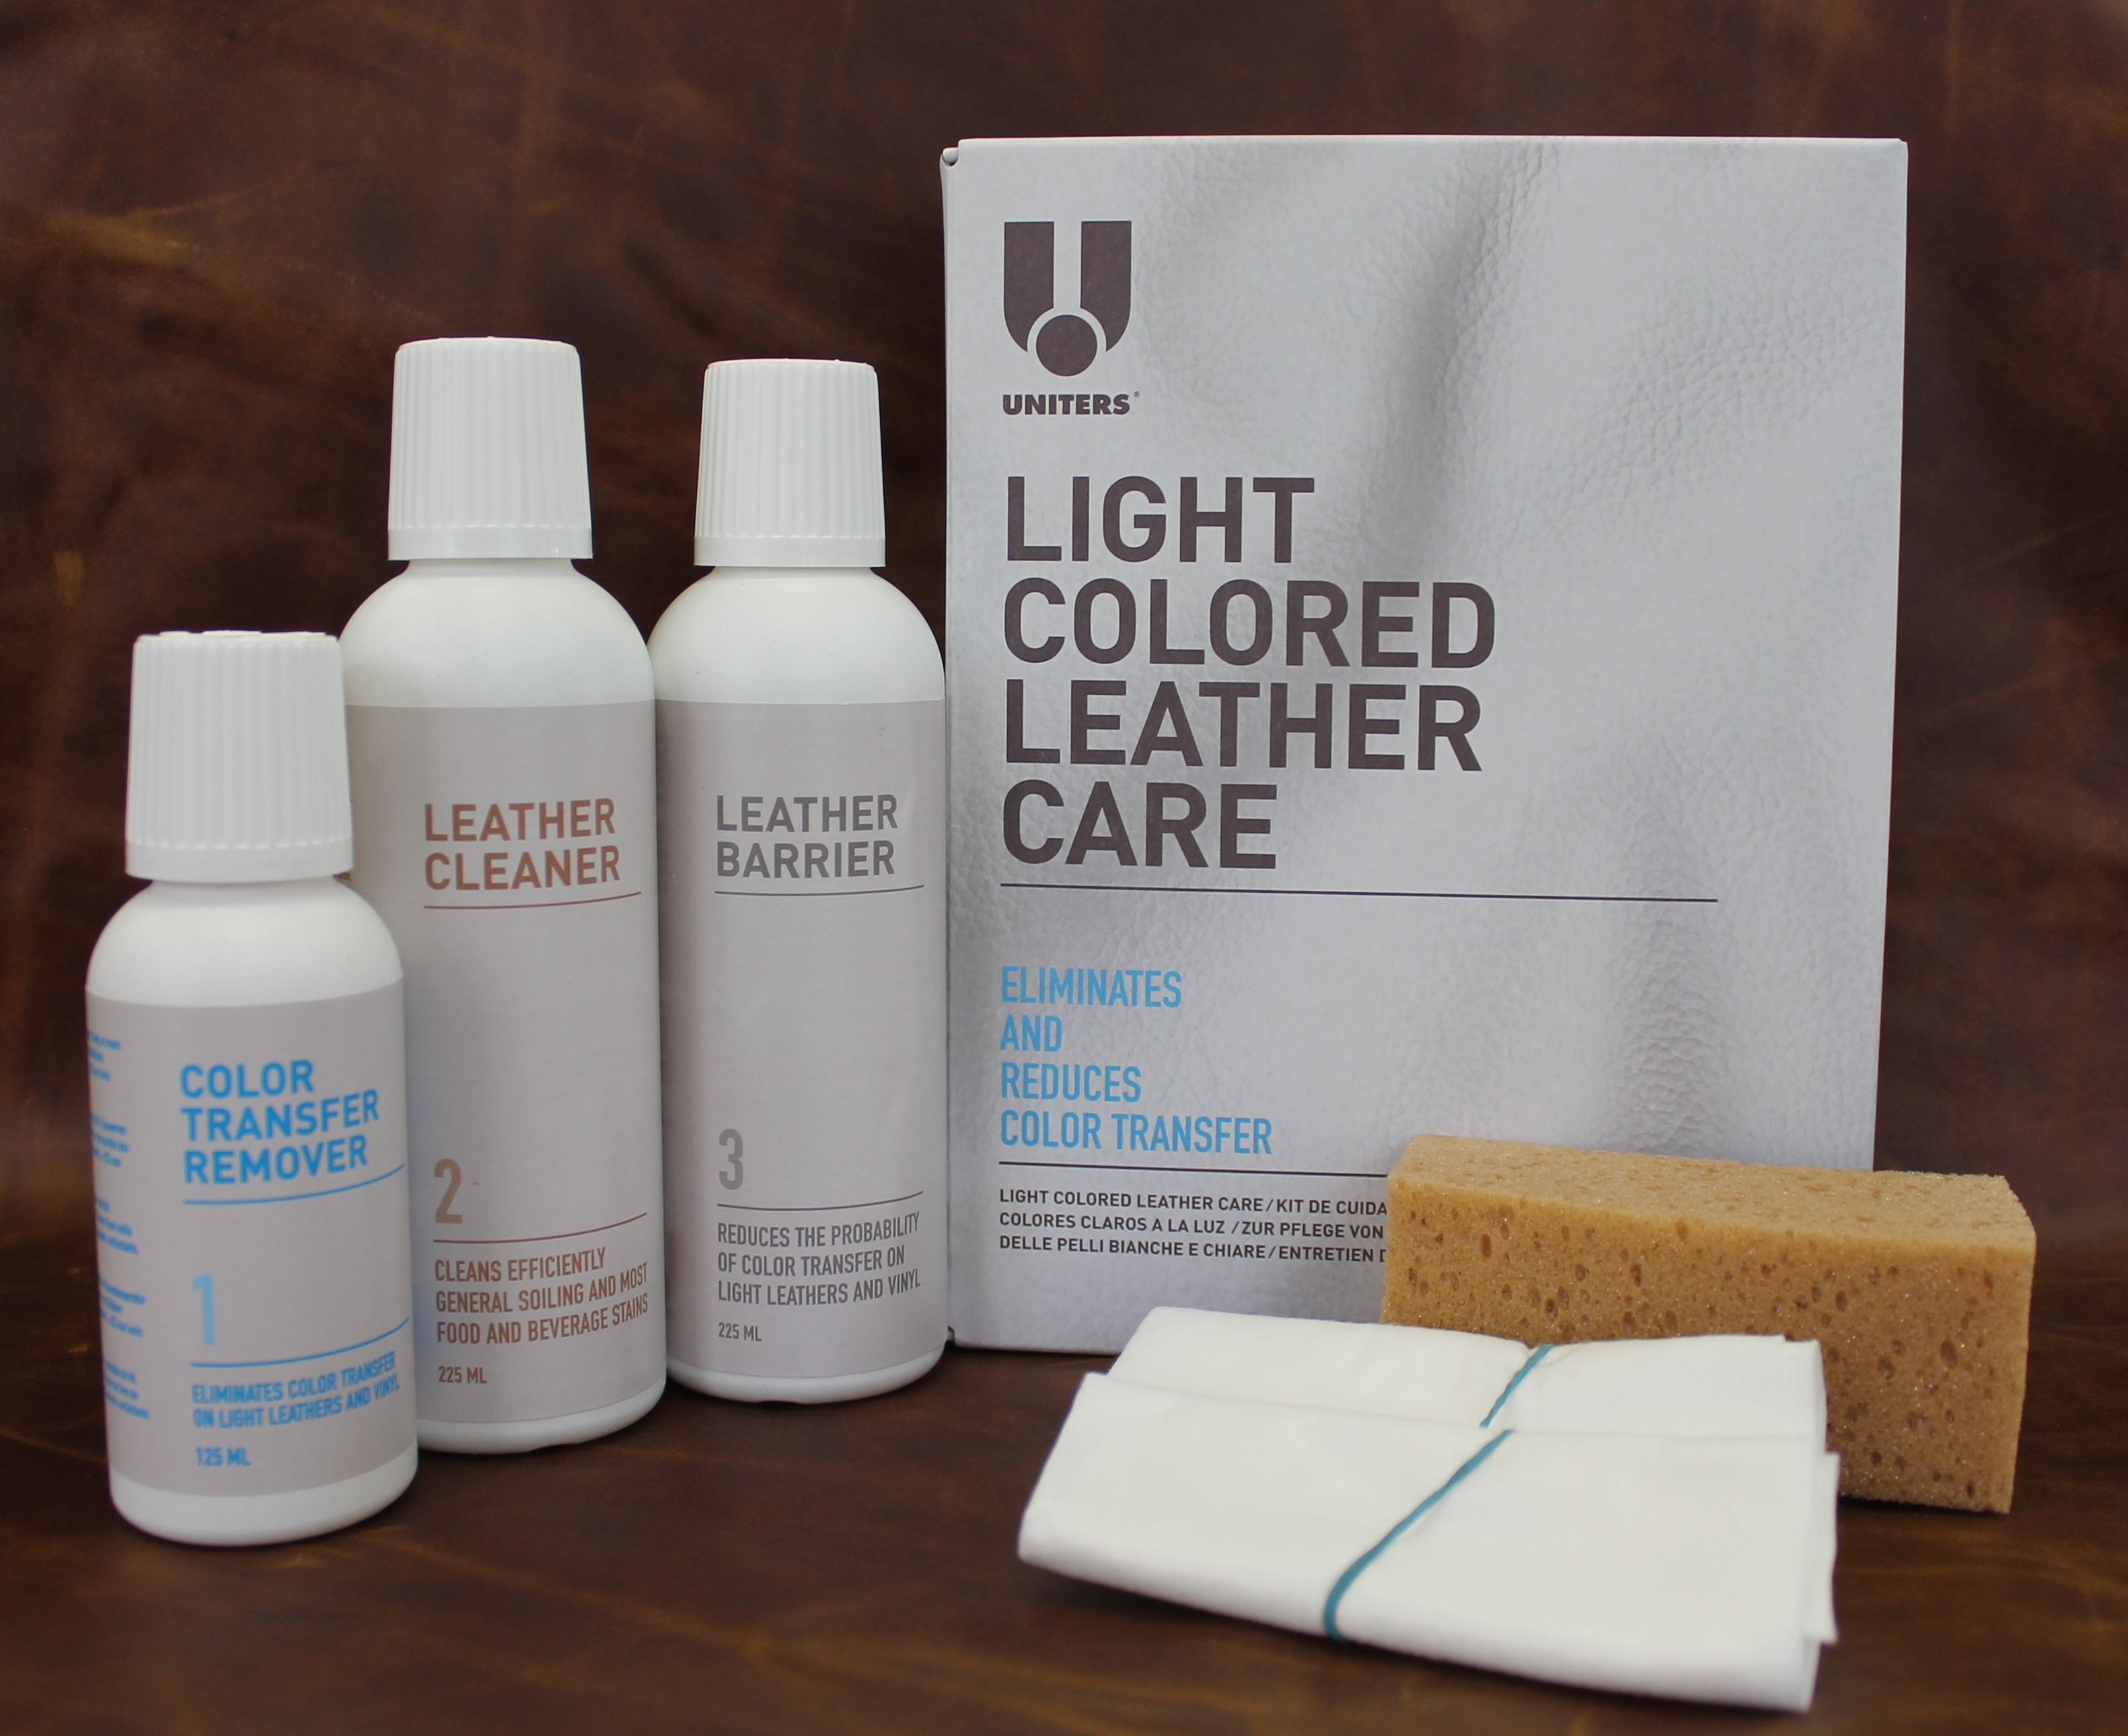 Light Colored Leather Care - 225ml